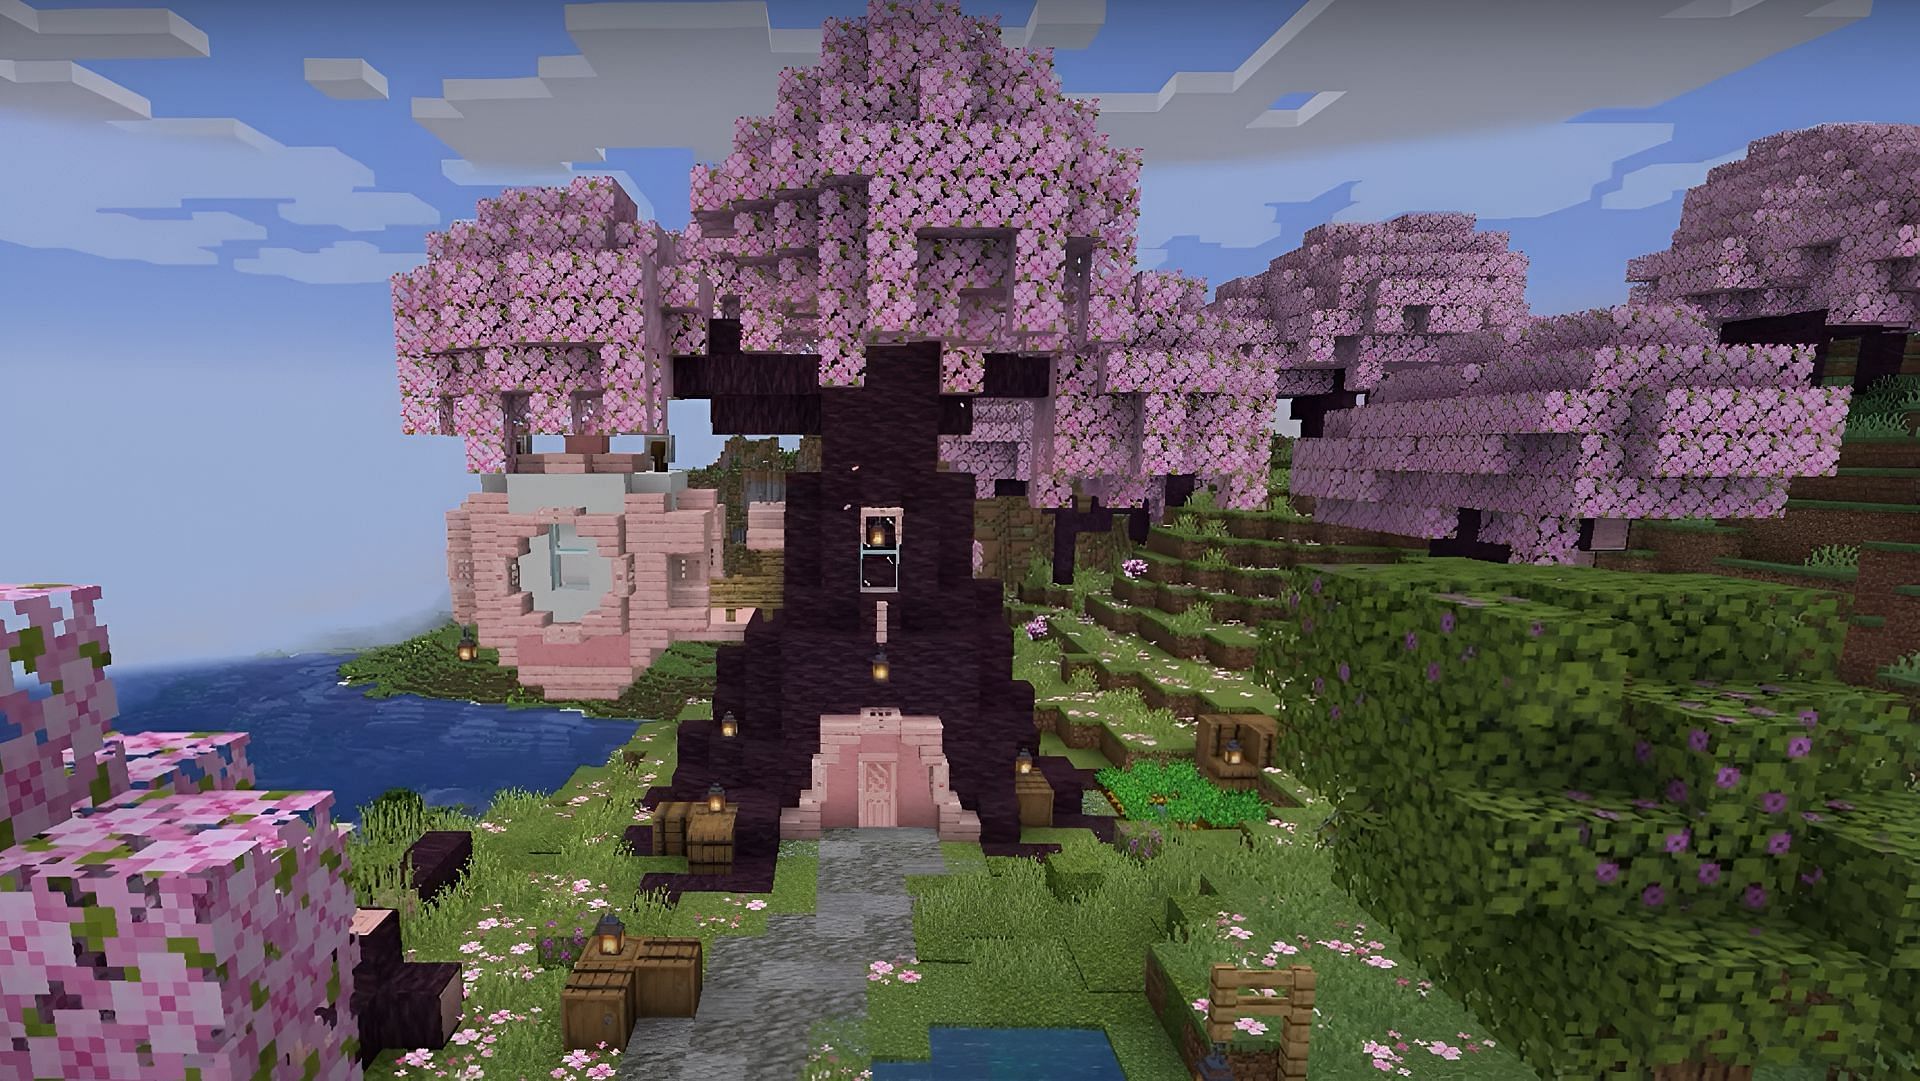 Minecraft fans have already come up with some great designs using the game